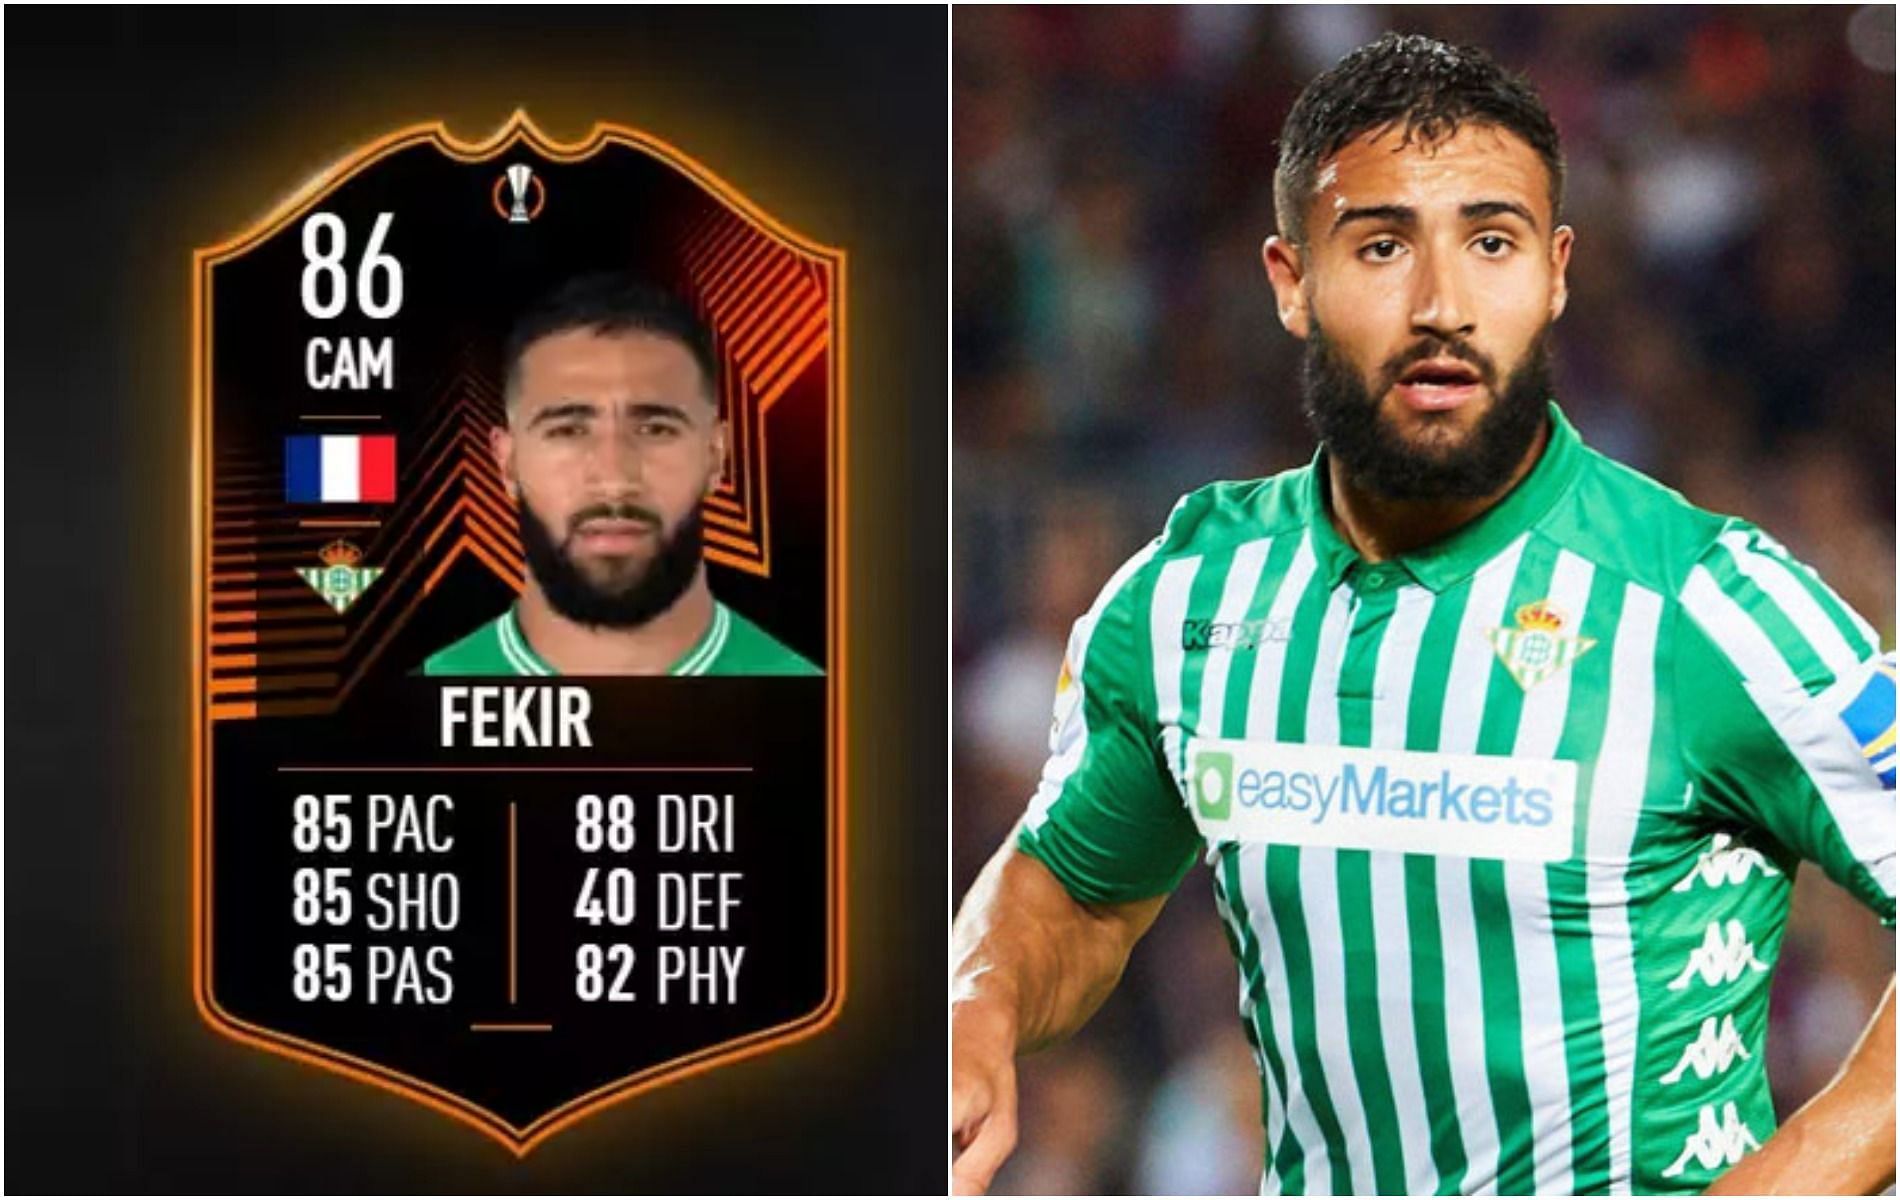 Fekir becomes the first Europa League player to get a RTTK SBC (Images via EA Sports/Getty)